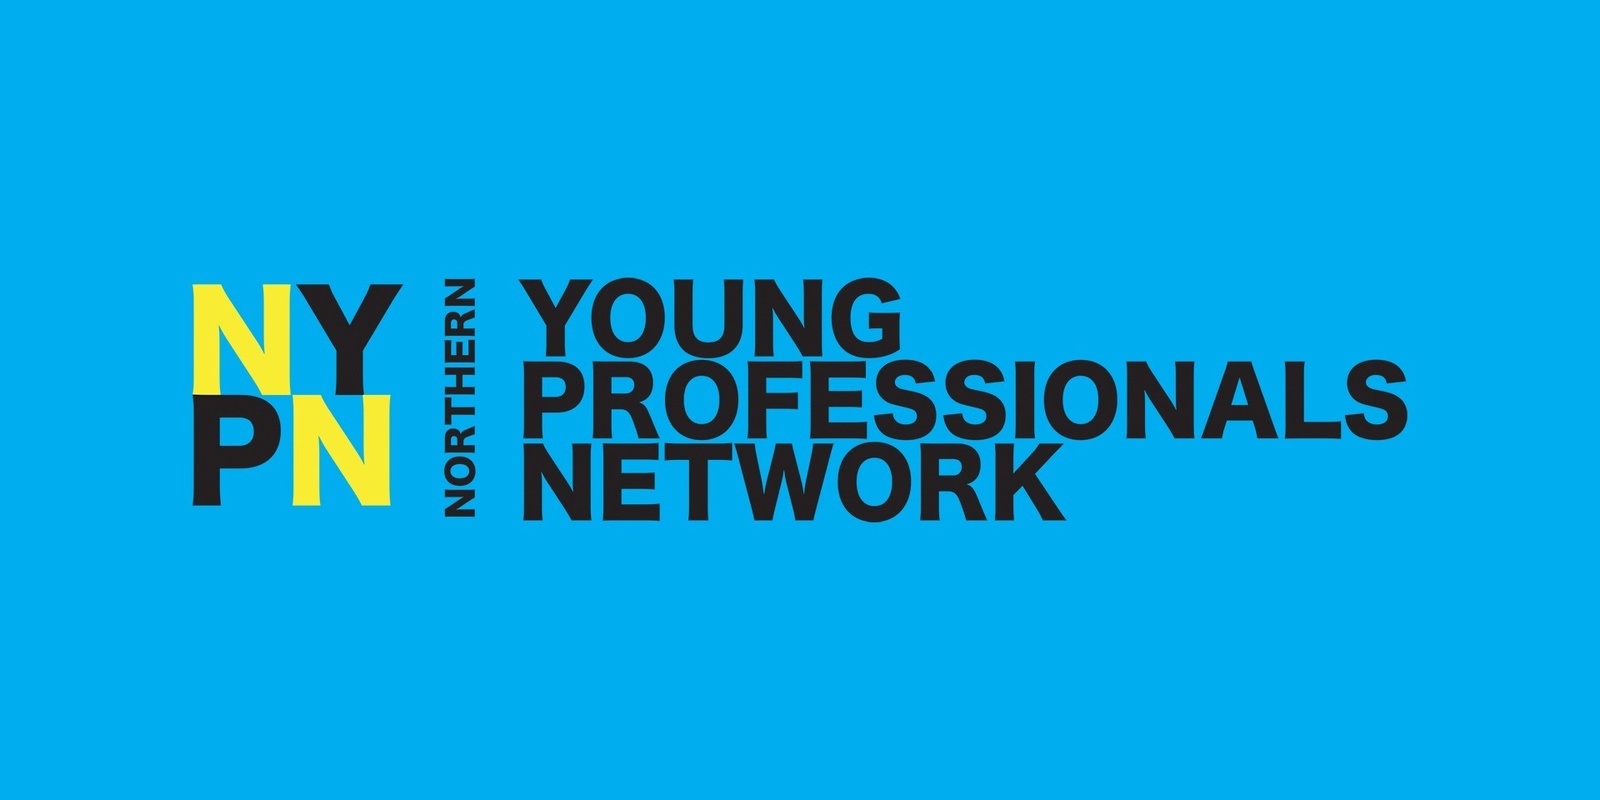 Northern Young Professional Network's banner